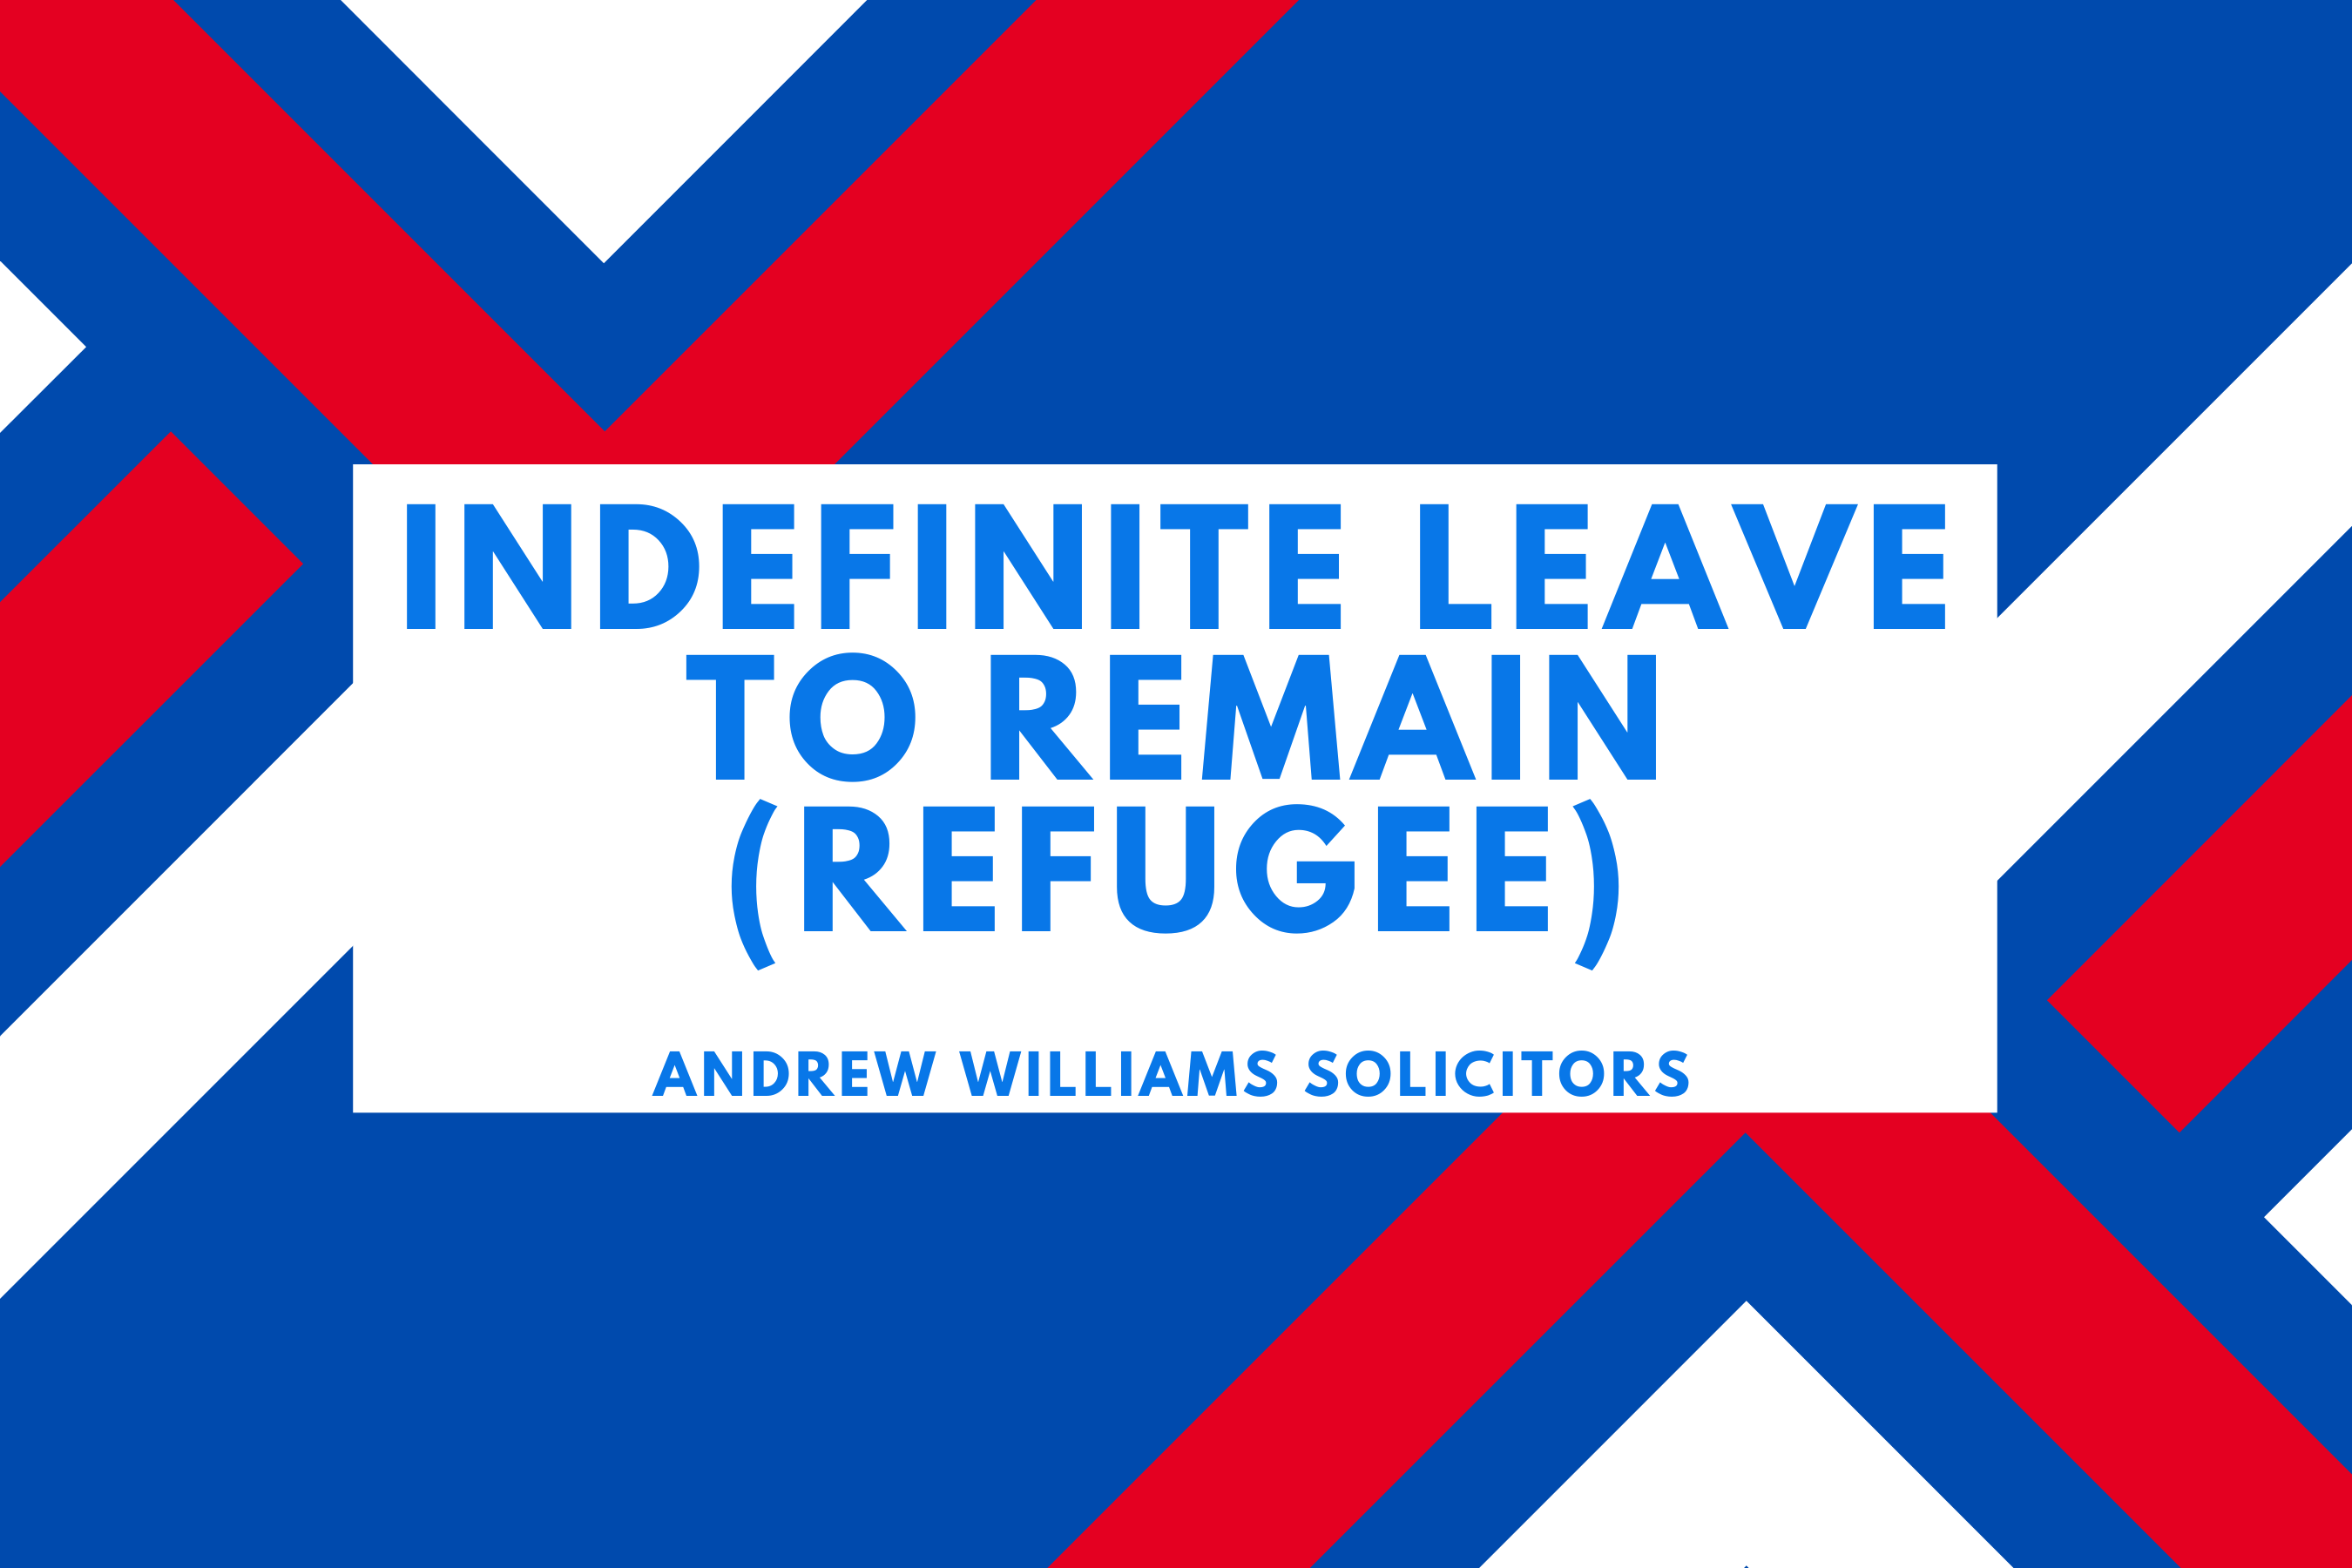 Indefinite leave to remain (refugee)